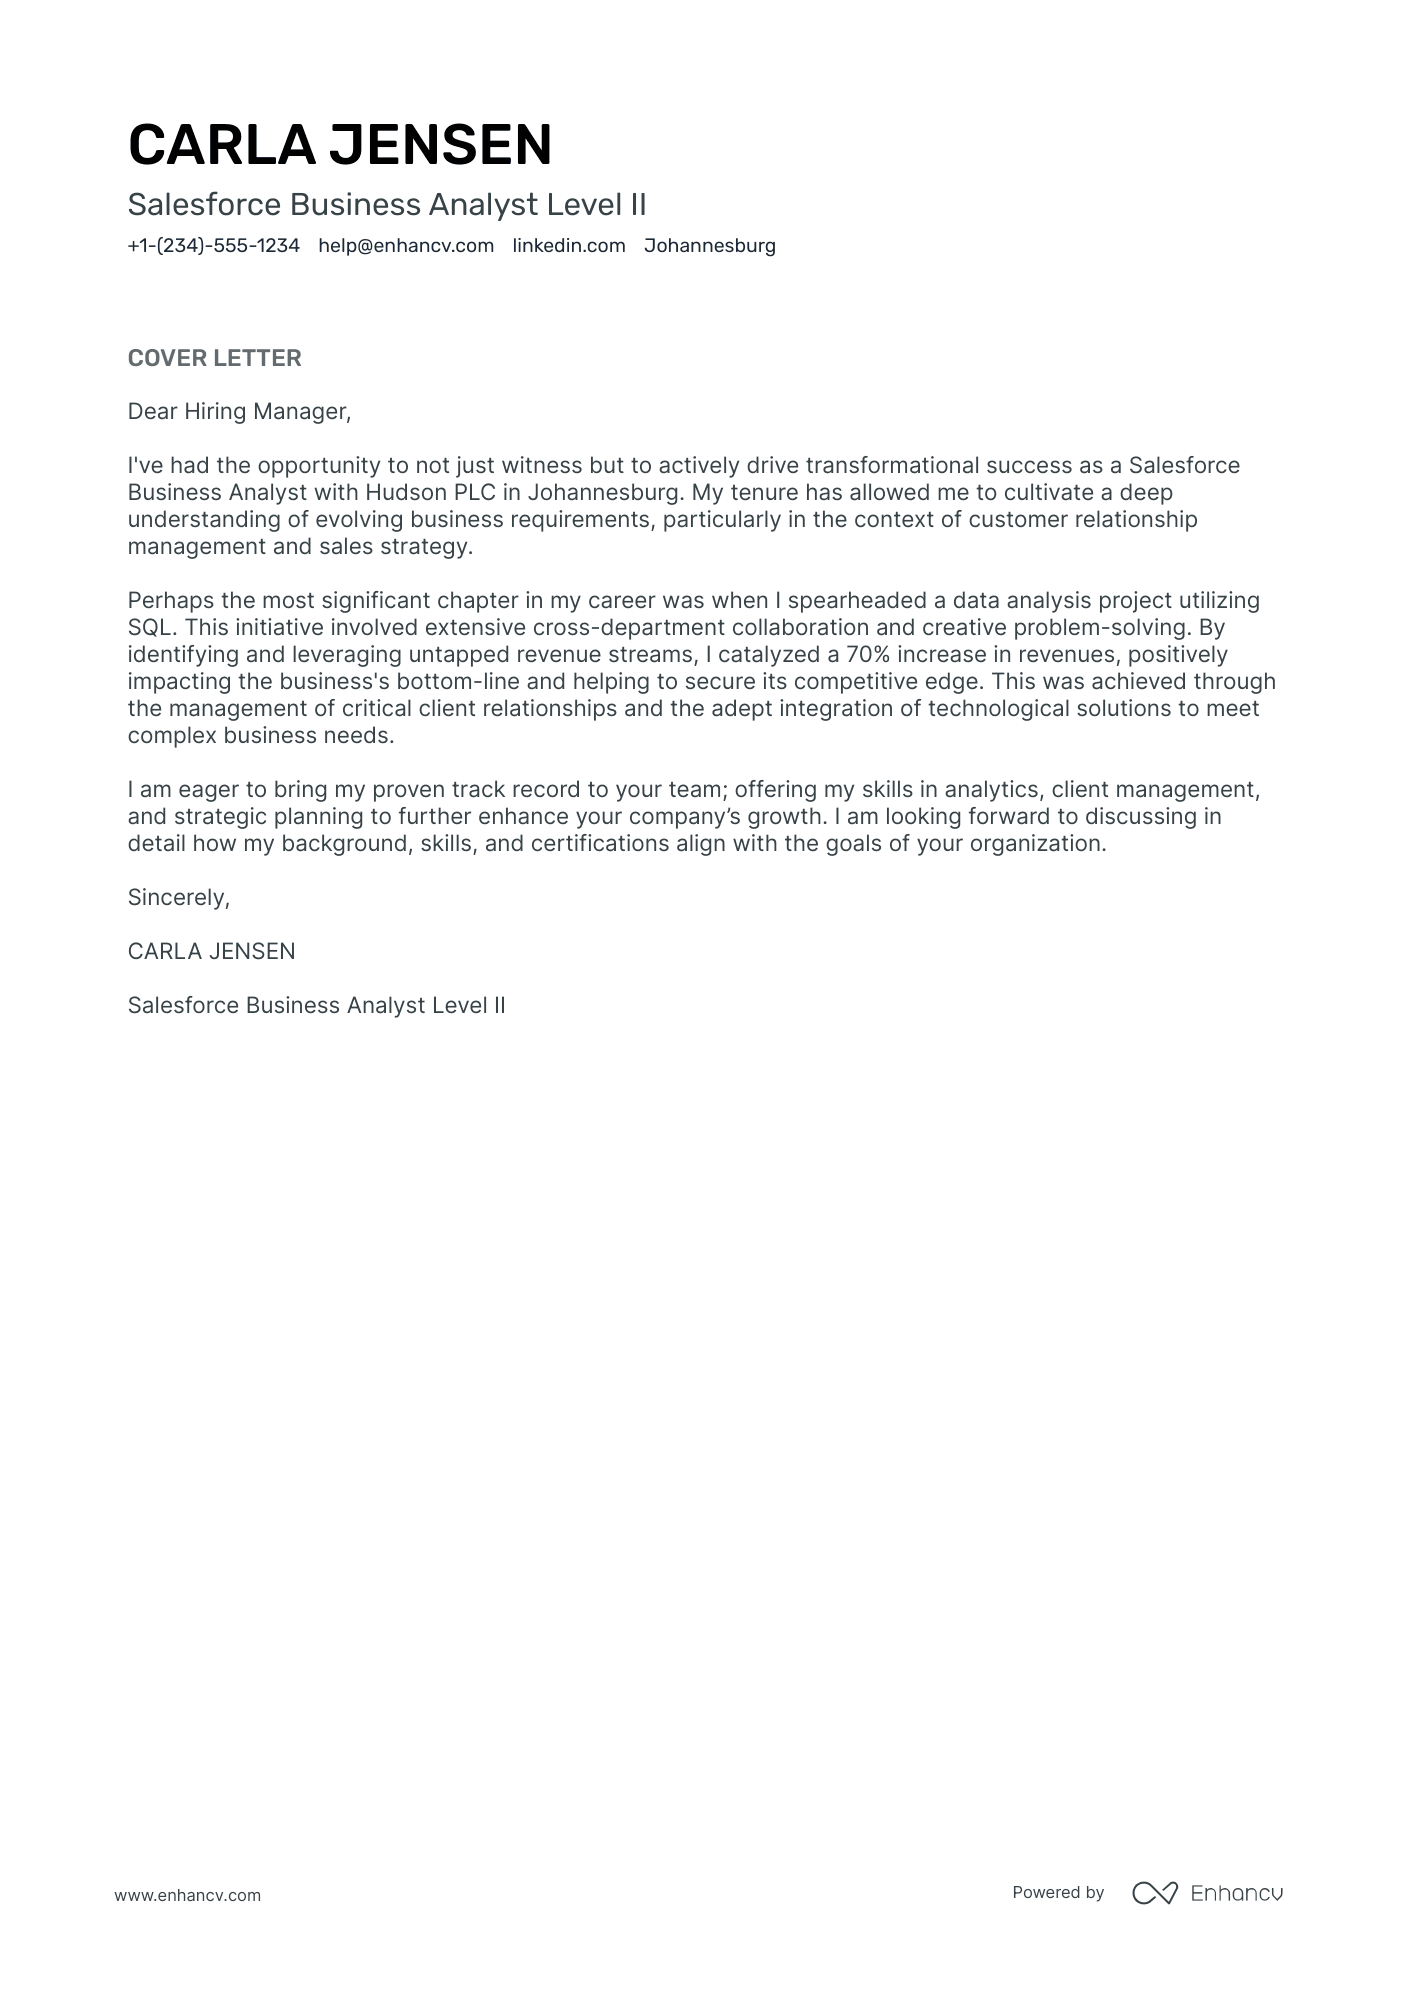 Salesforce Business Analyst cover letter